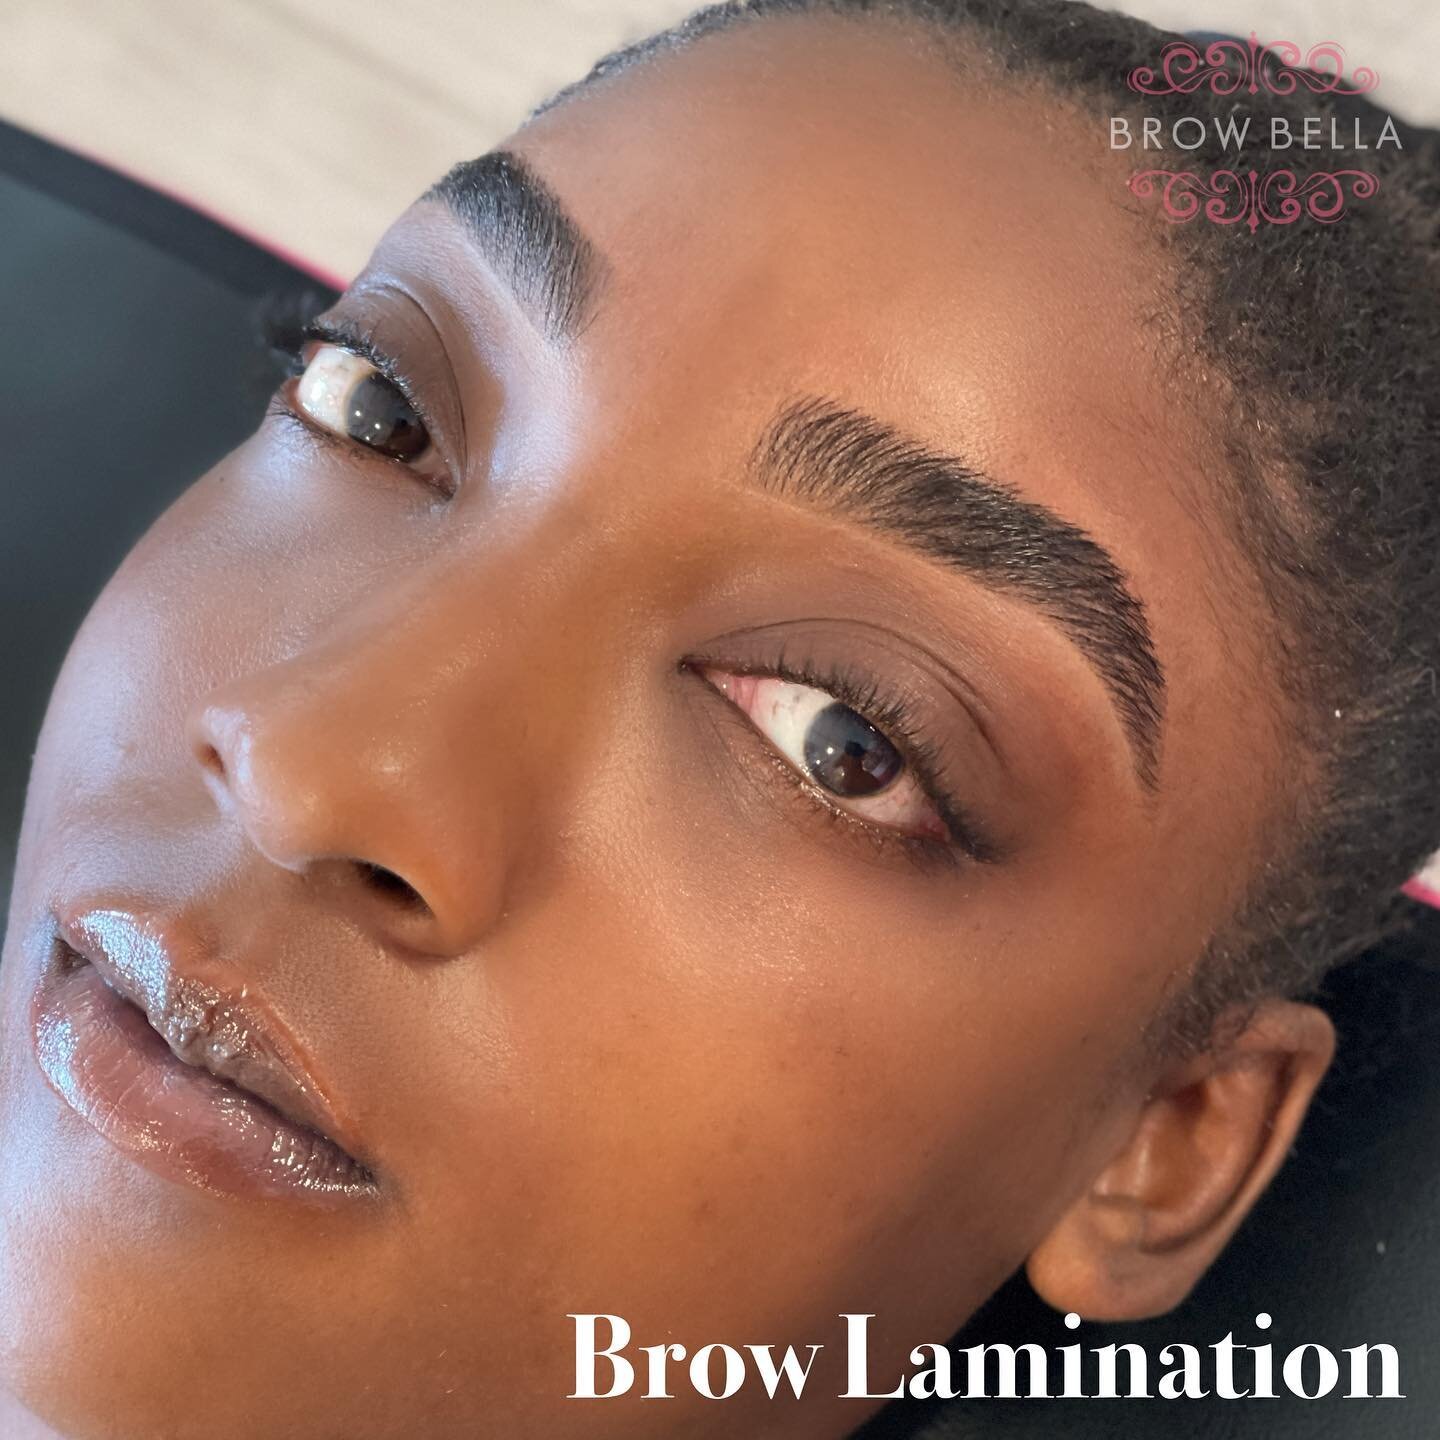 Maybe she&rsquo;s born with it. Maybe it&rsquo;s a Brow Lamination🤩😋✨✨
✨
Our signature #BrowLamination service done by our artist Krystal. This service is a long-term brow styling treatment that smooths and relaxes brow hair allowing it to be shape